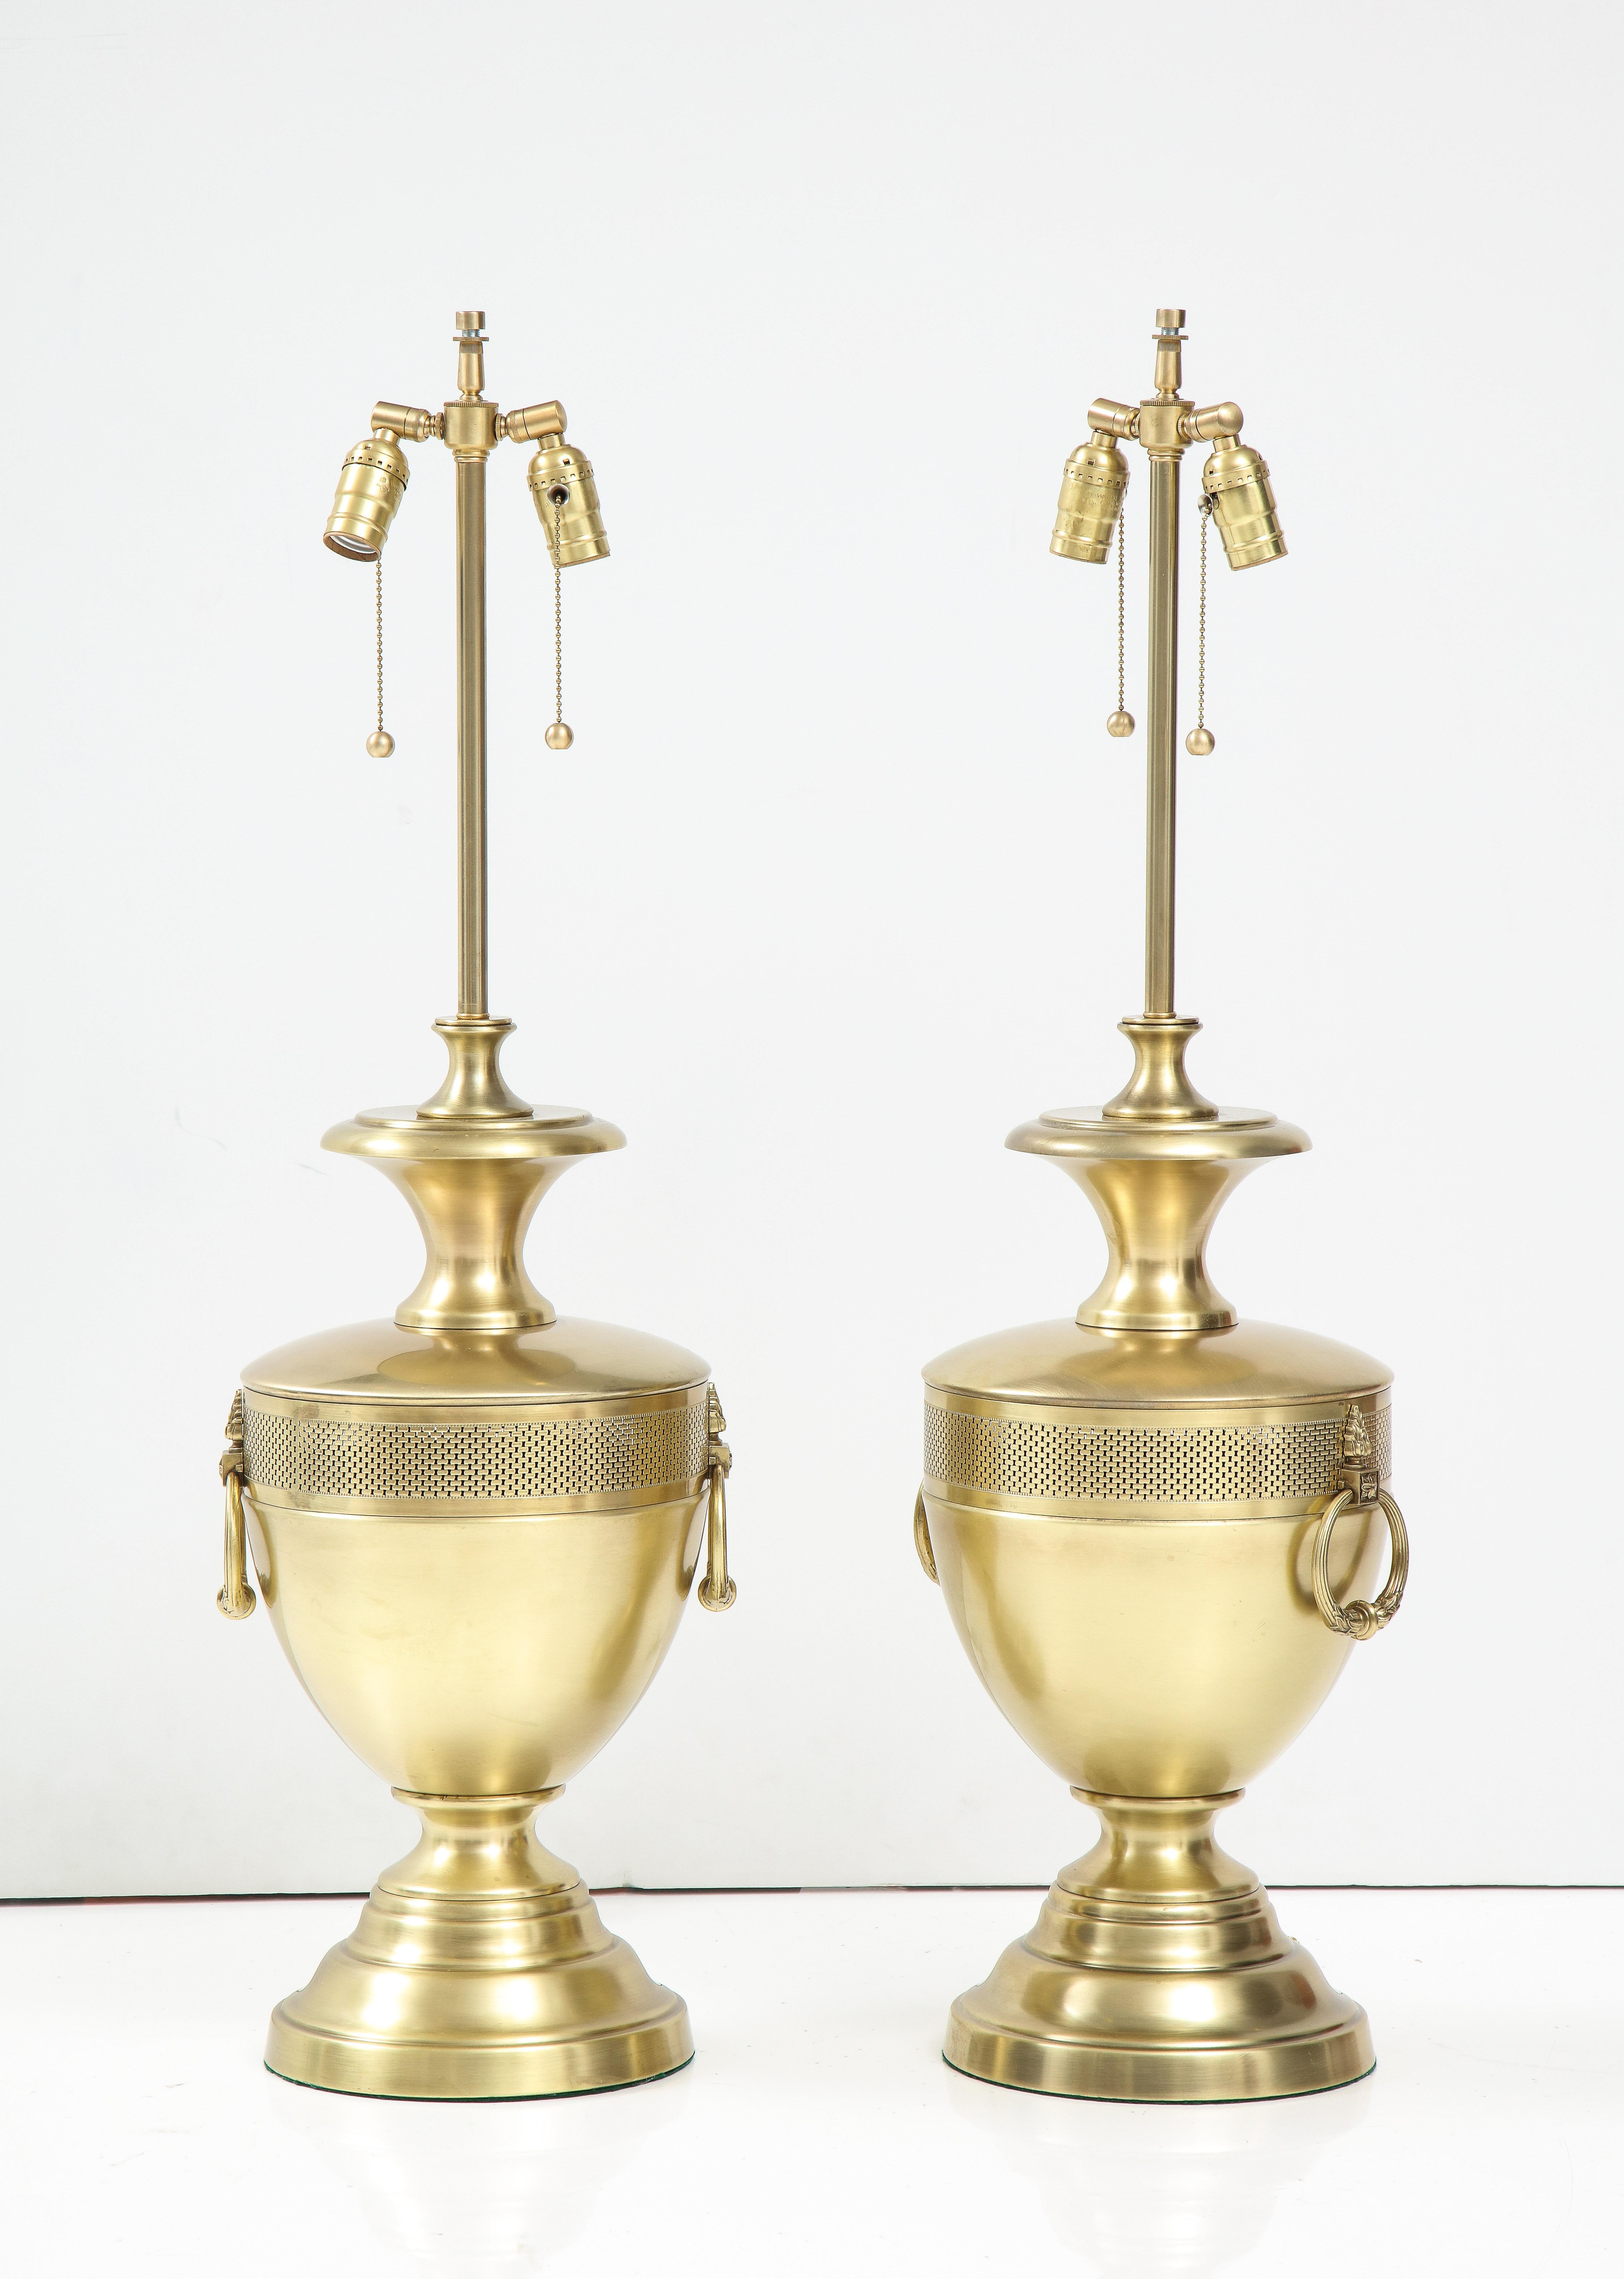 Pair of mid century satin brass large scale statement lamps by Stiffel. Lamps have been rewired for use in the USA with double cluster sockets. 75W max each bulb.